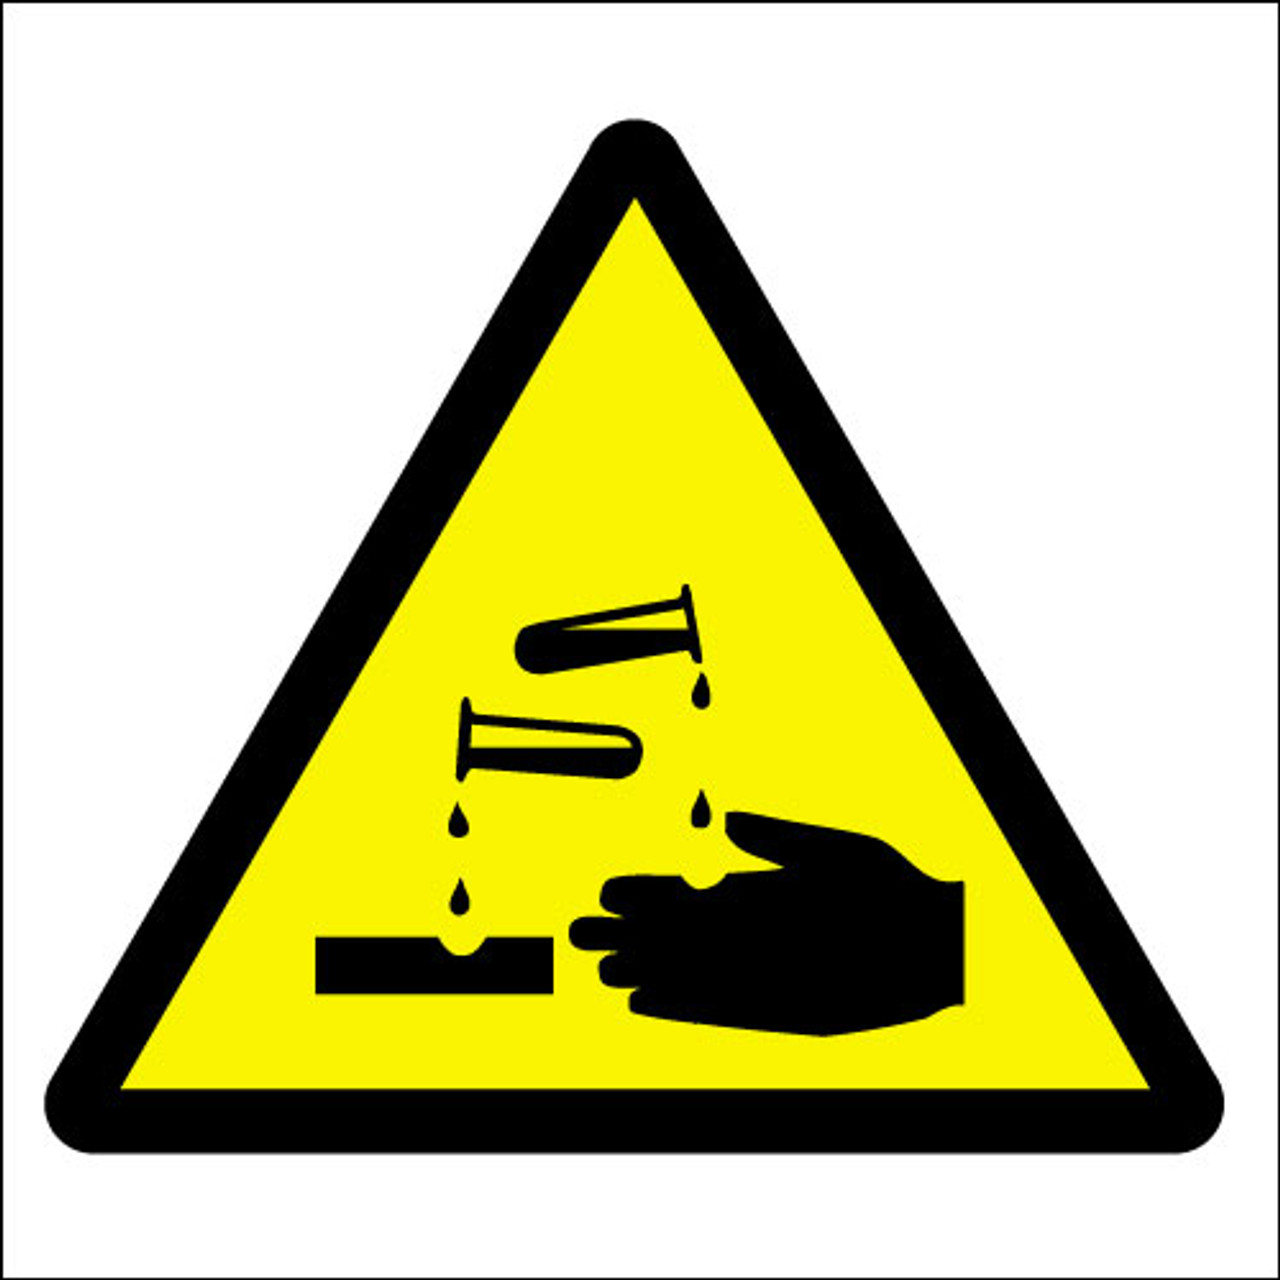 Corrosive symbol - Signs 2 Safety